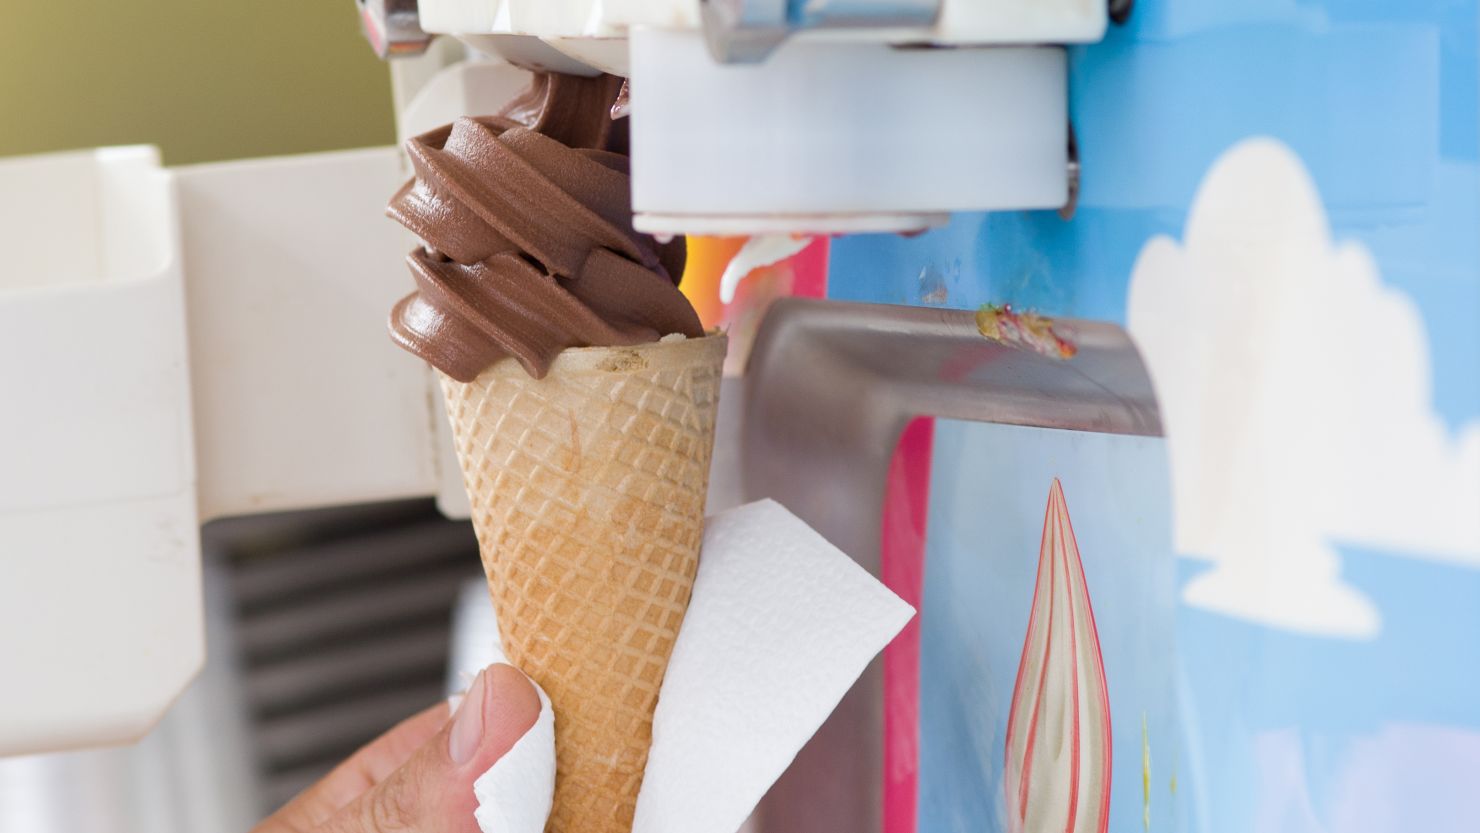 commercial Ice cream scoops come in various different sizes. They